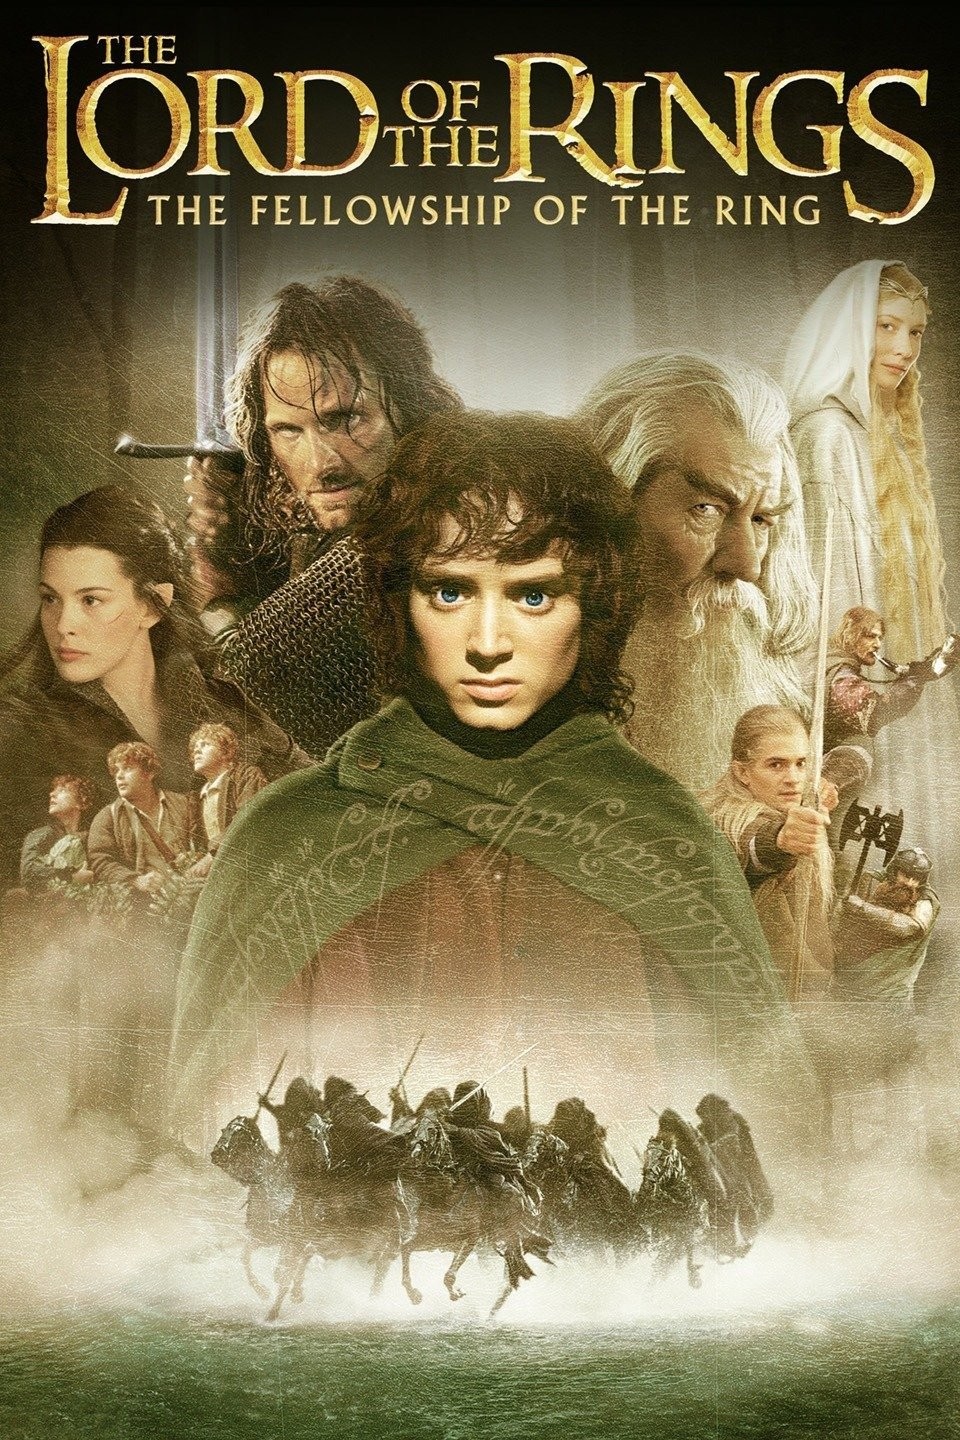 The Art Of The Fellowship Of The Ring [PDF, TXT]